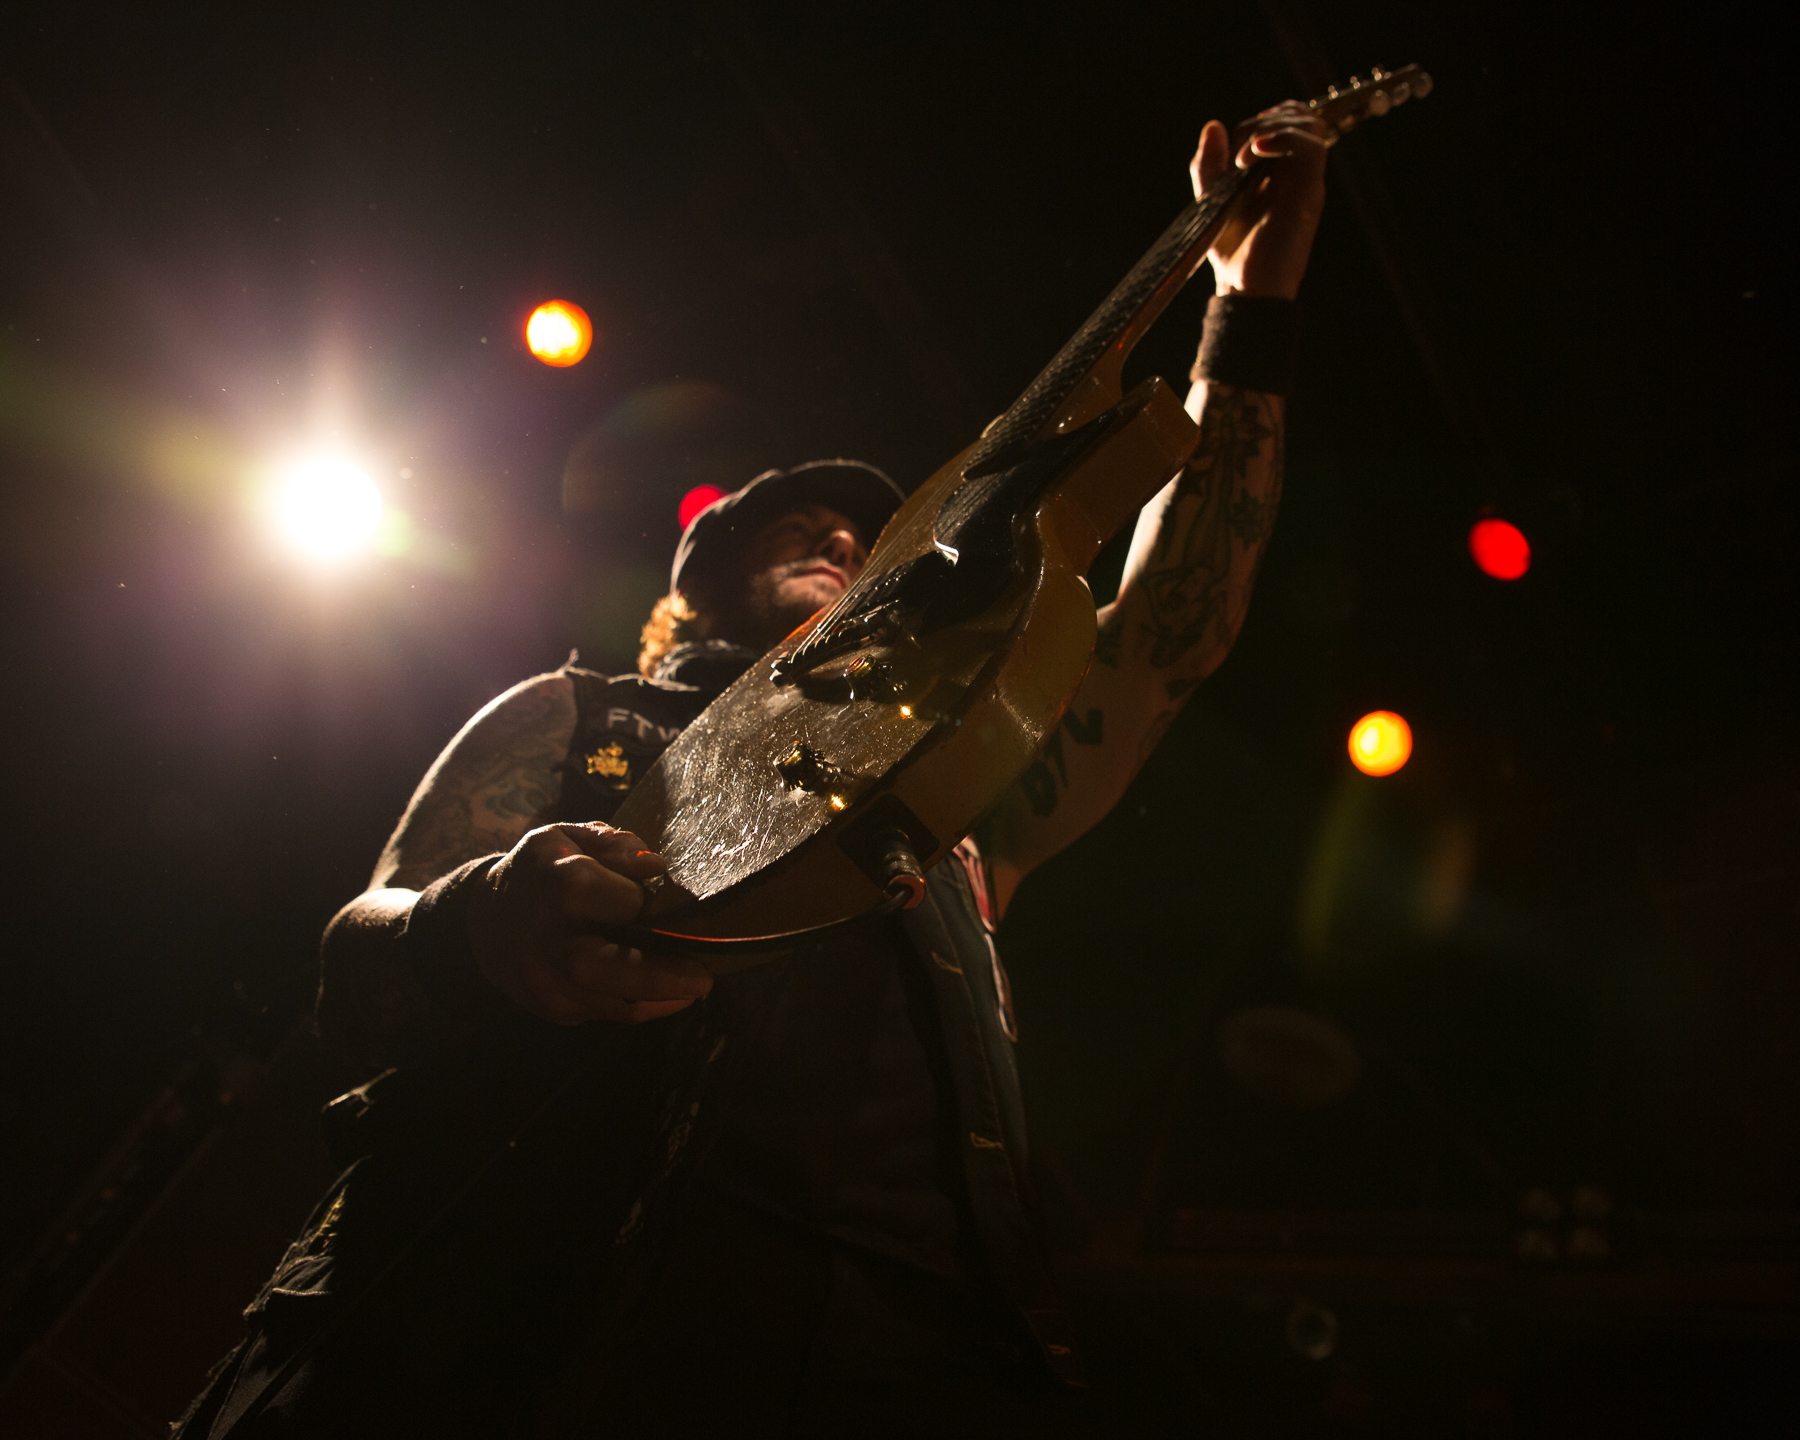 Guitarist Keith Nelson performing with Buckcherry